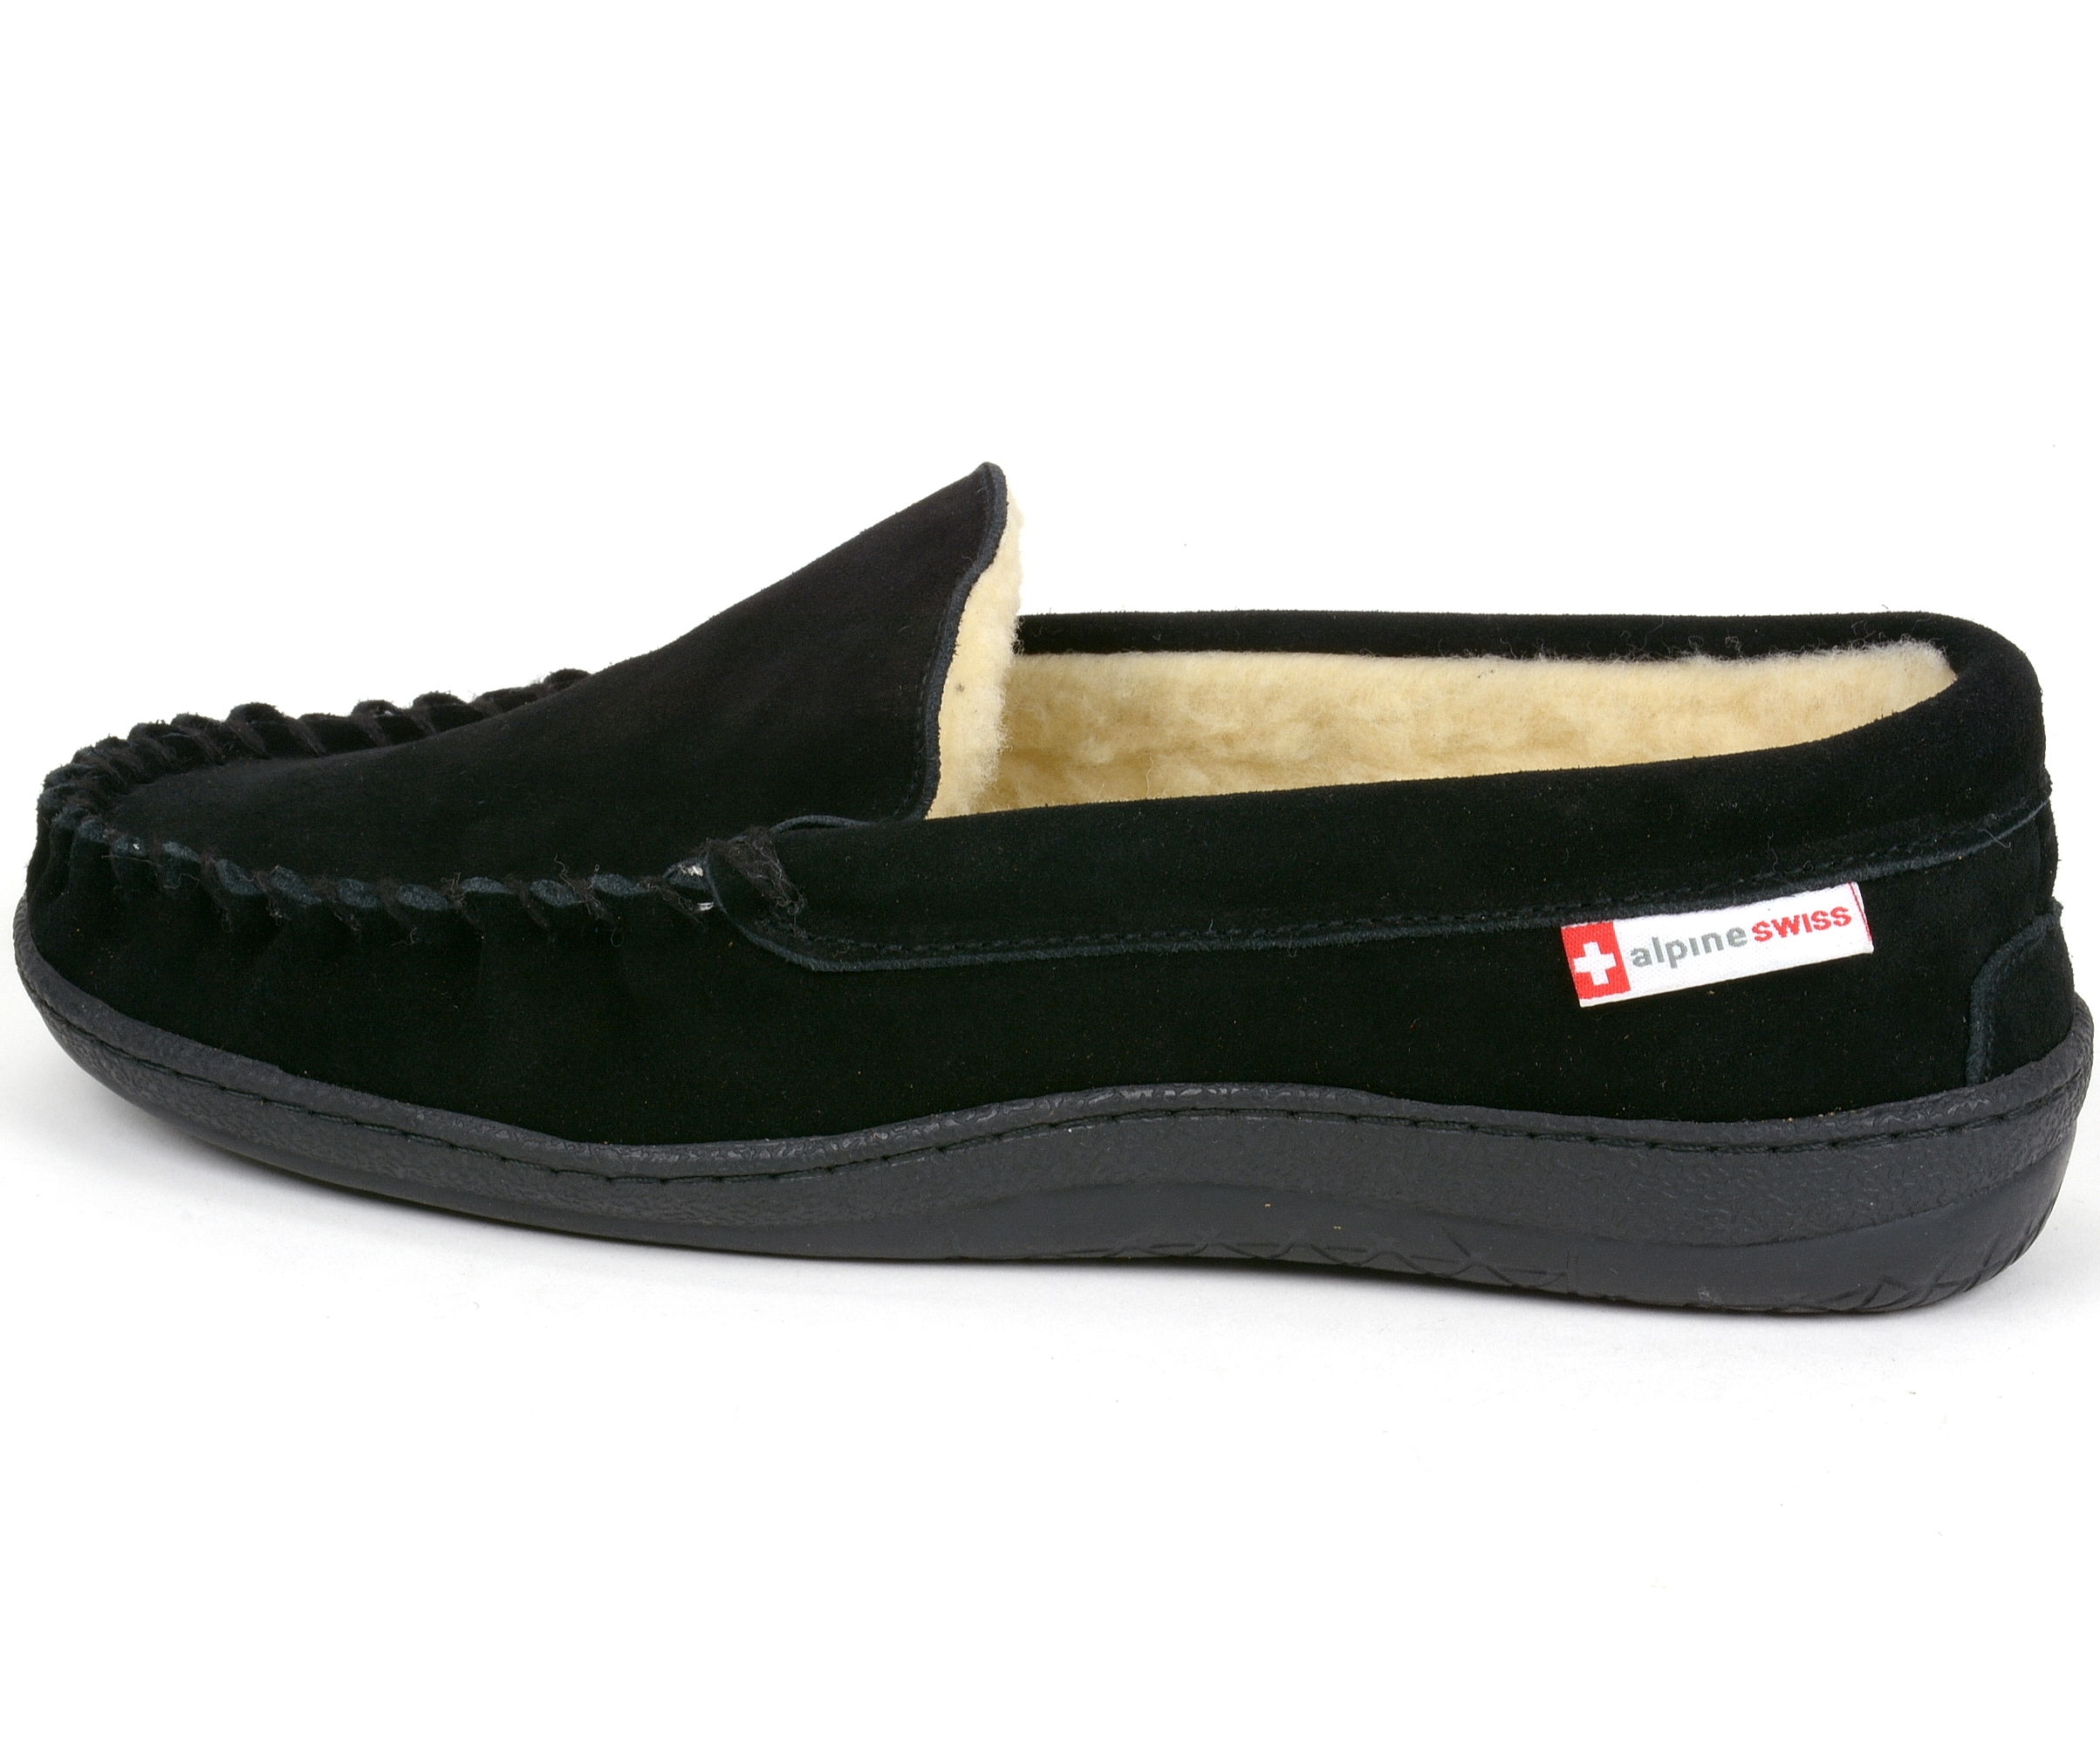 Alpine Swiss Yukon Men’s Suede and Shearling Moccasins Just $12.99 SHIPPED!